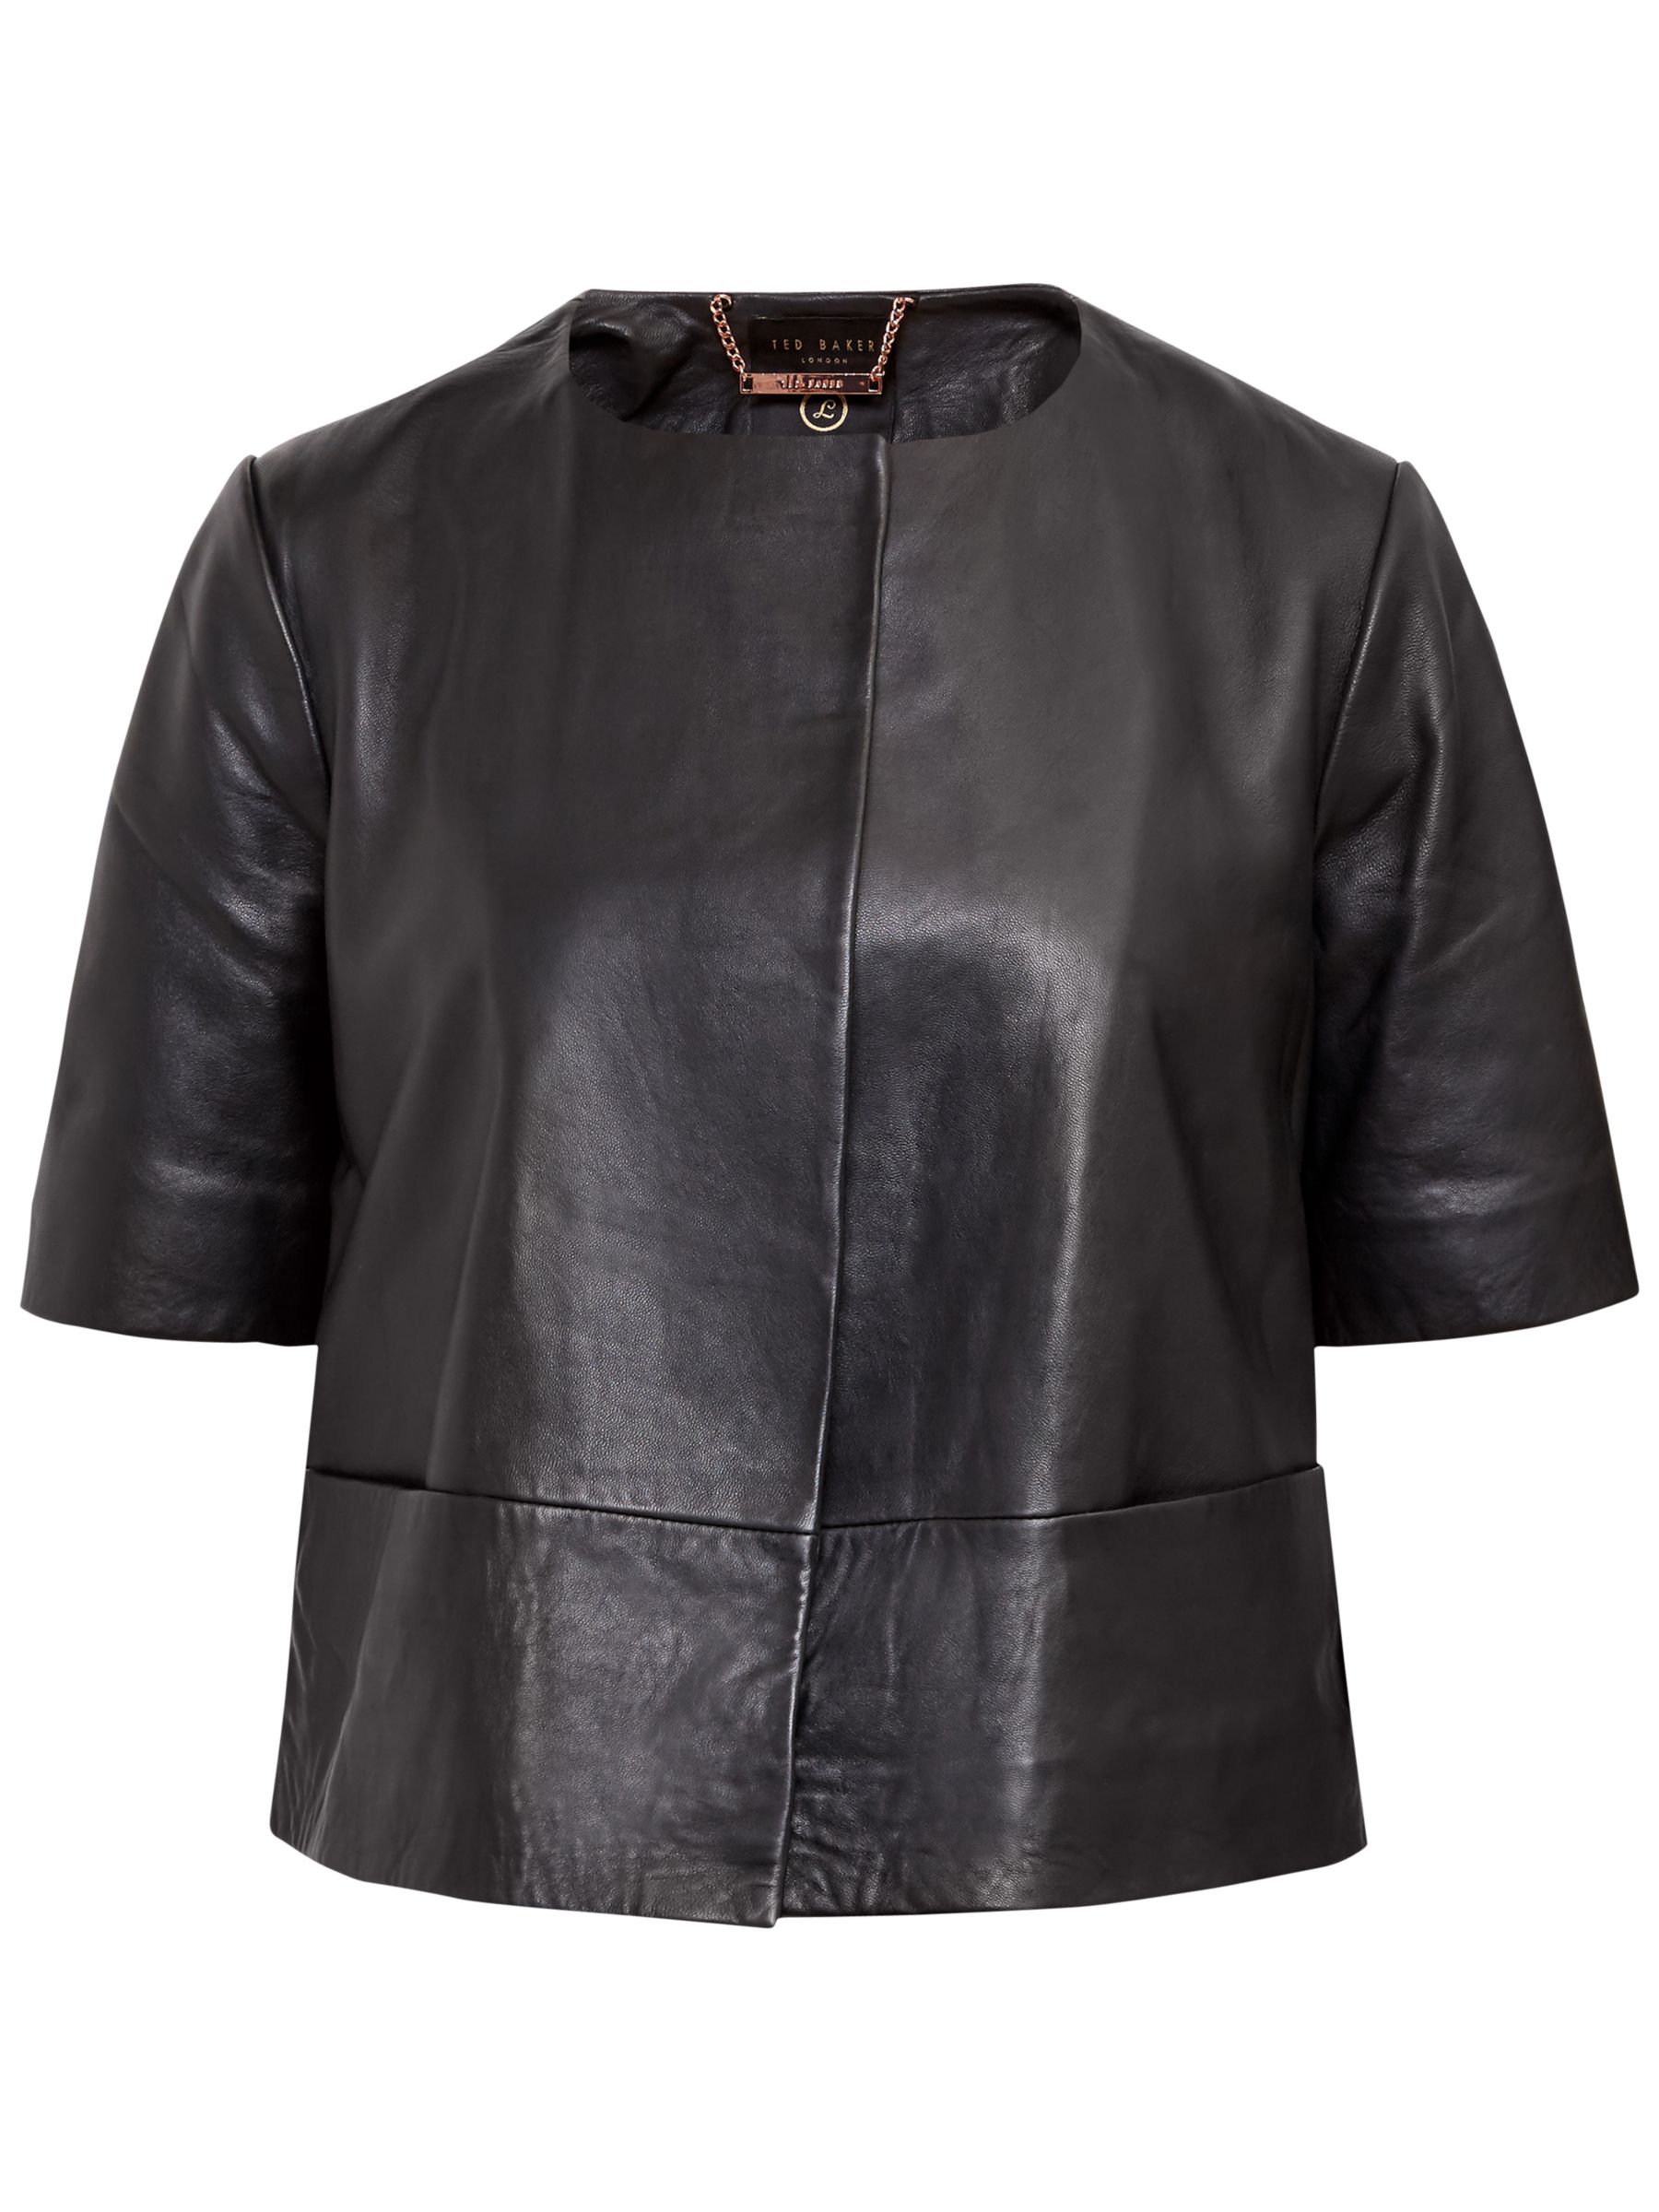 leather jacket with short sleeves